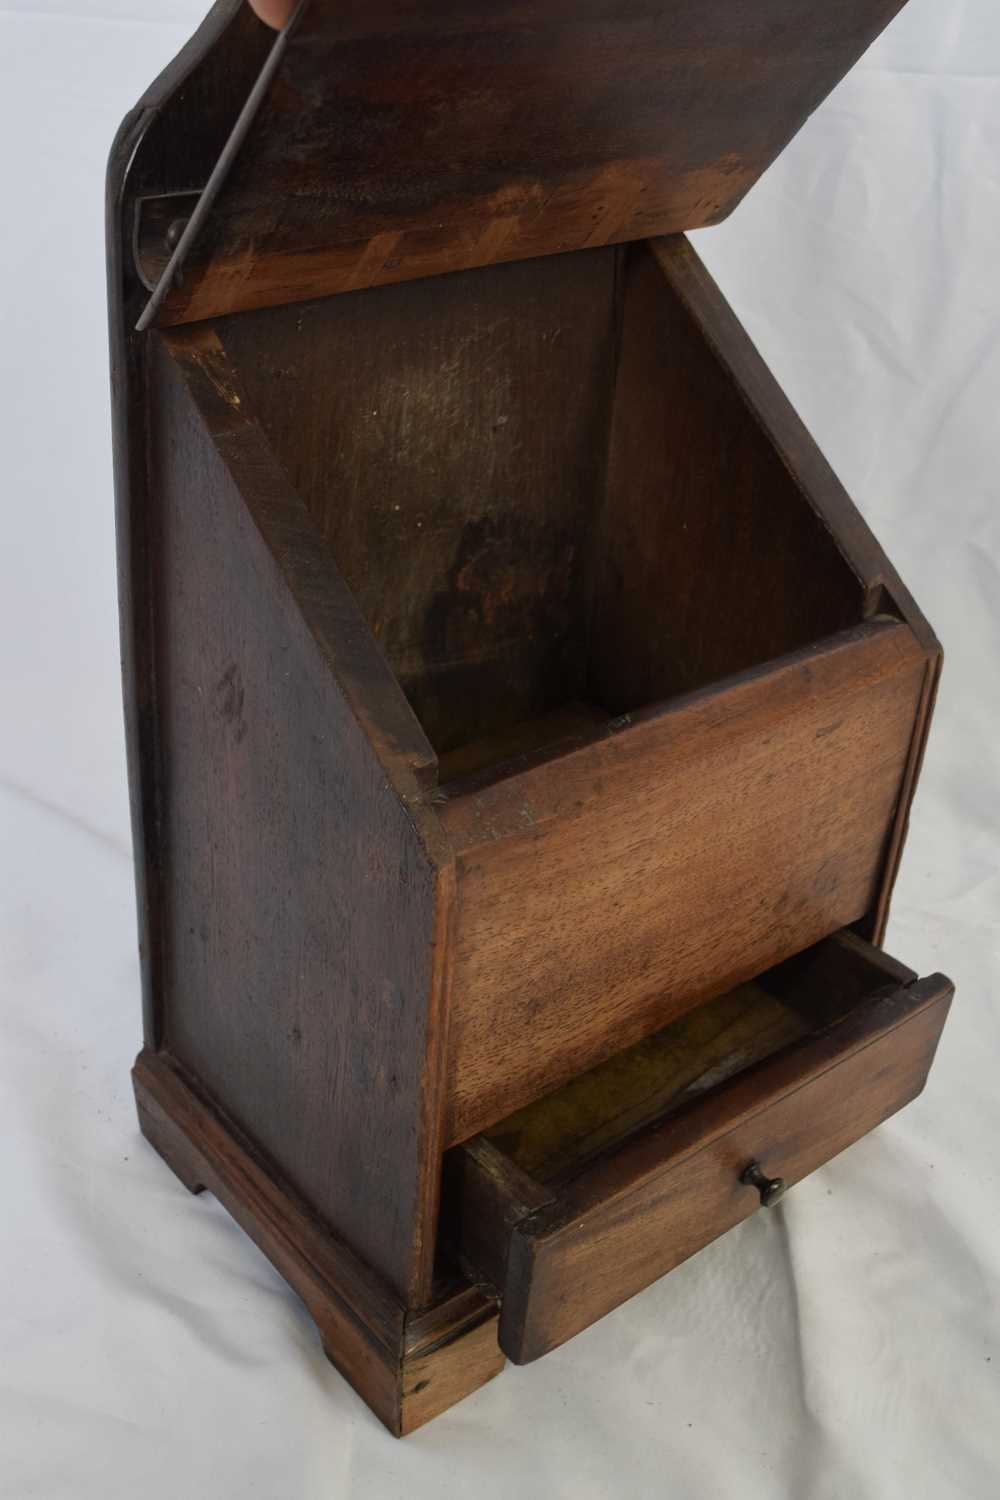 Unusual 19th century mahogany salt or storage box with wall mounting, flip lid with leather hinge - Image 2 of 4